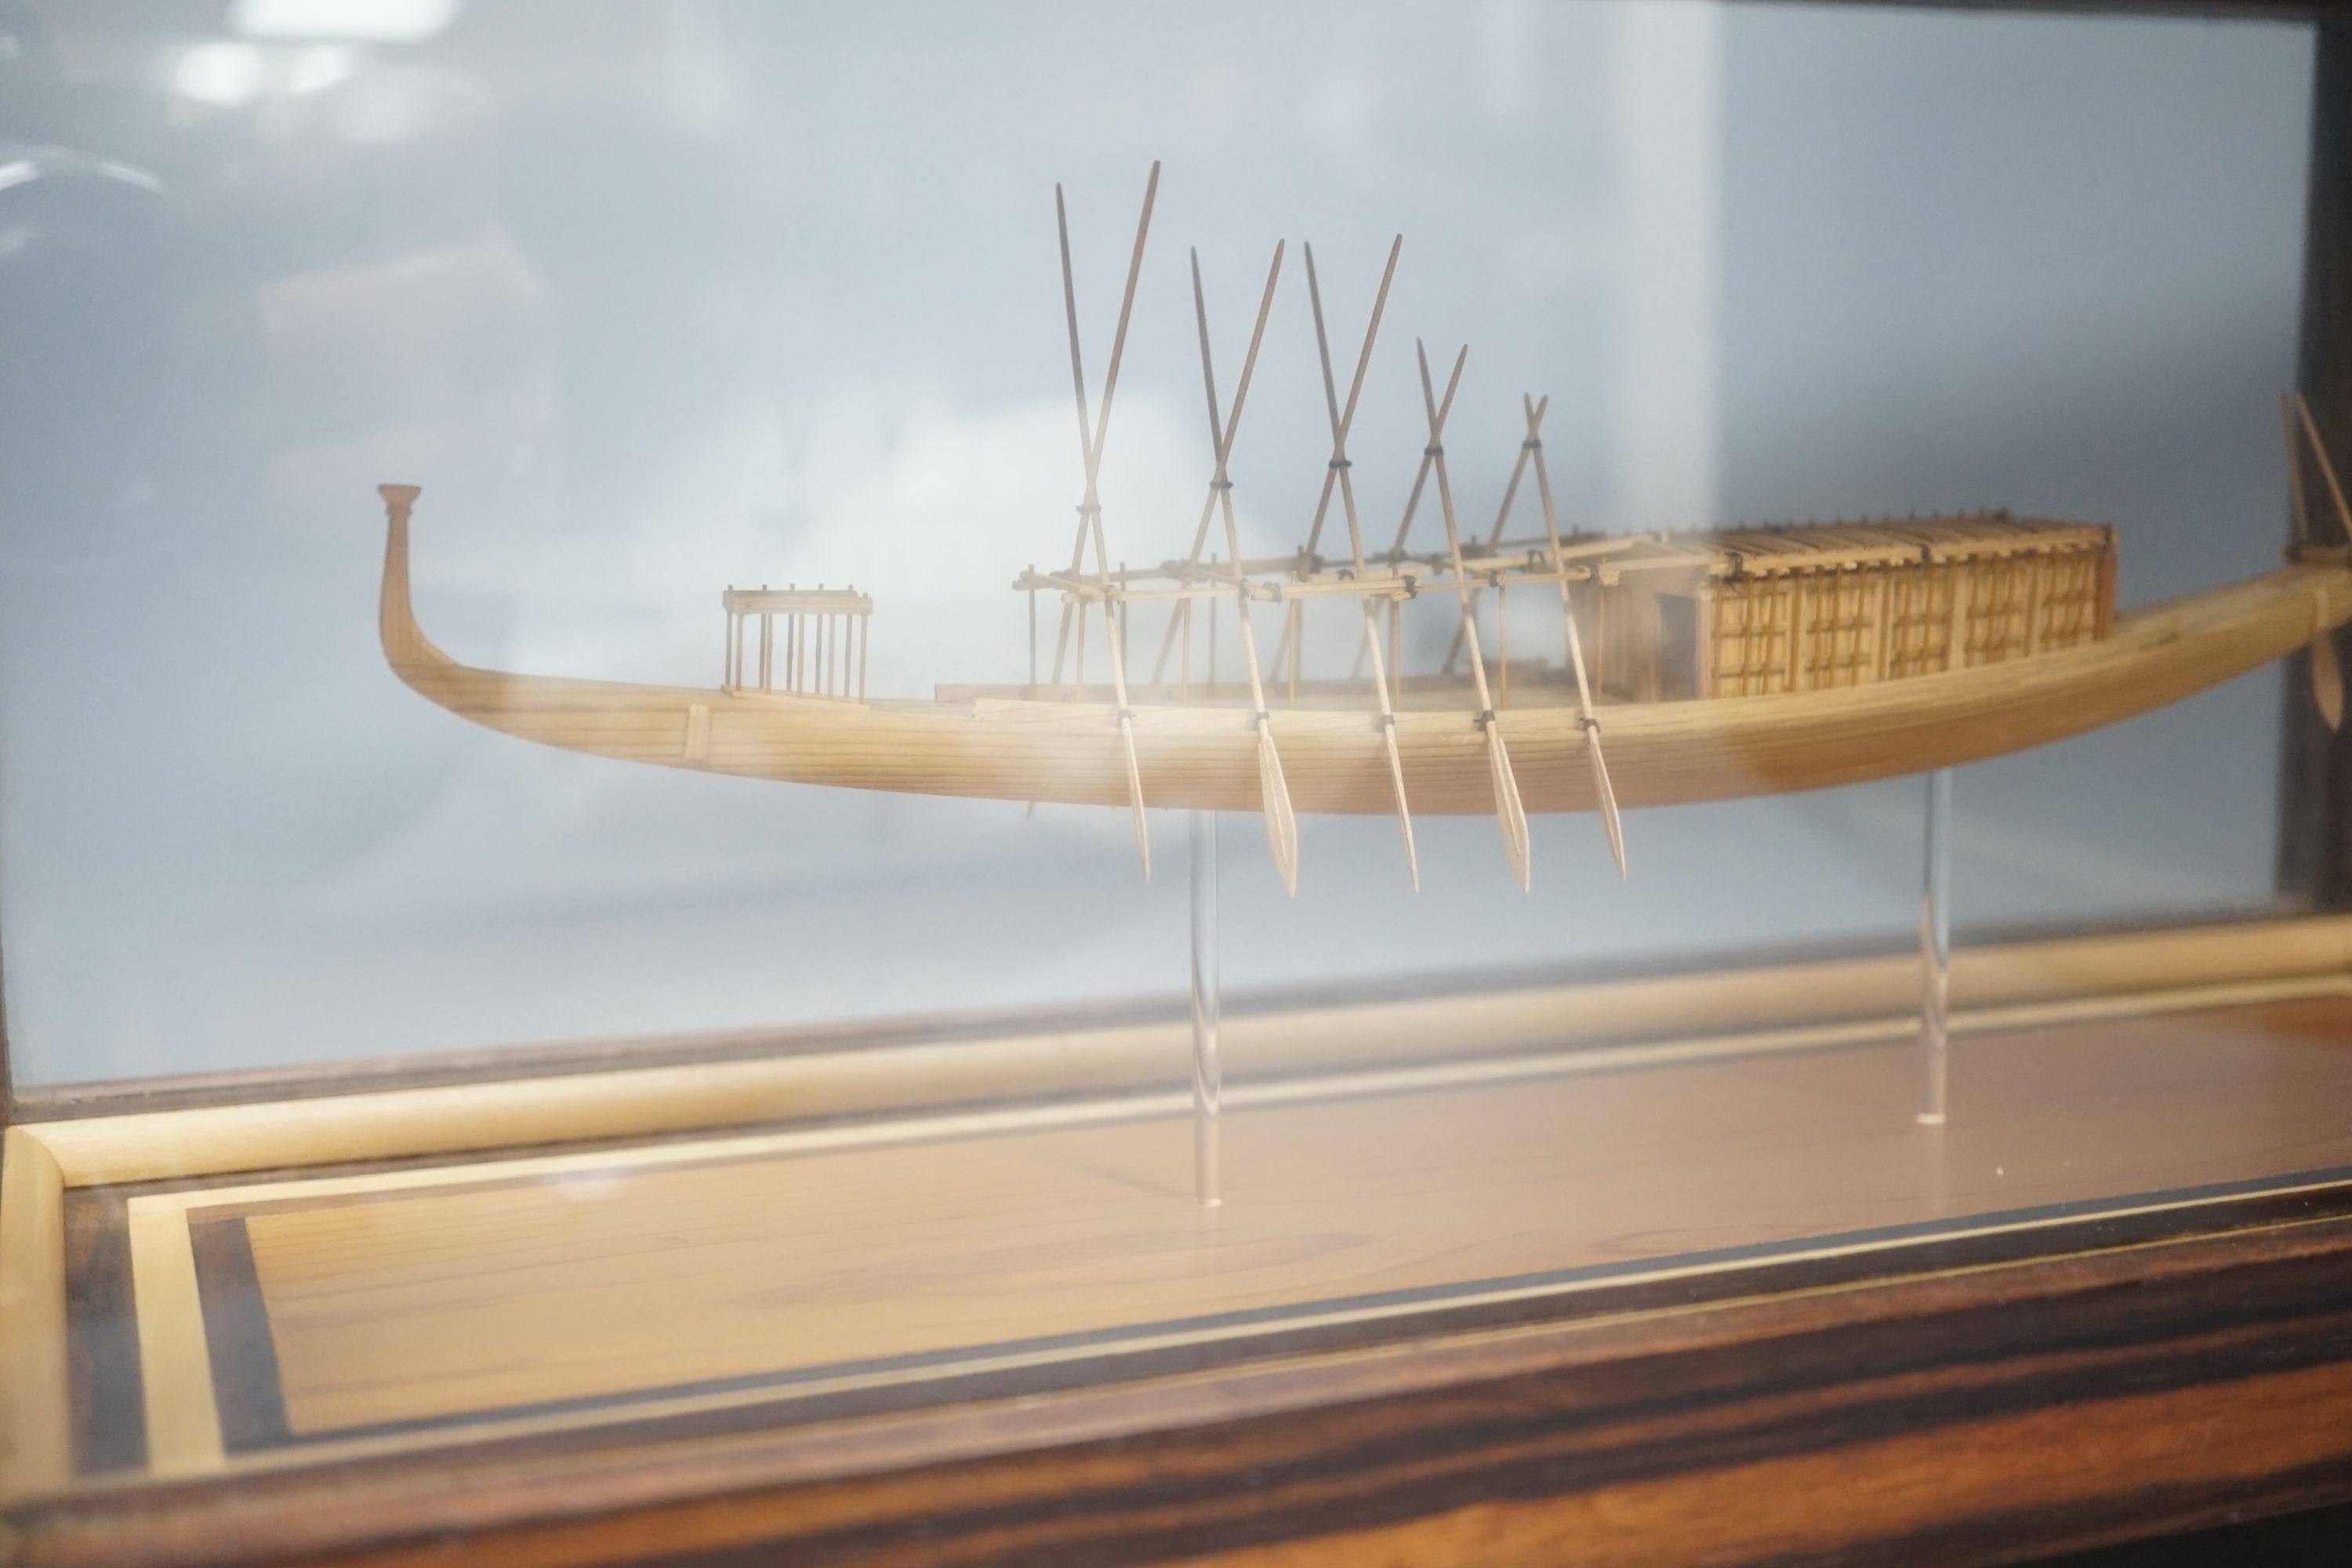 A calamander cased model of an Ancient Egyptian barge, width 42 cms